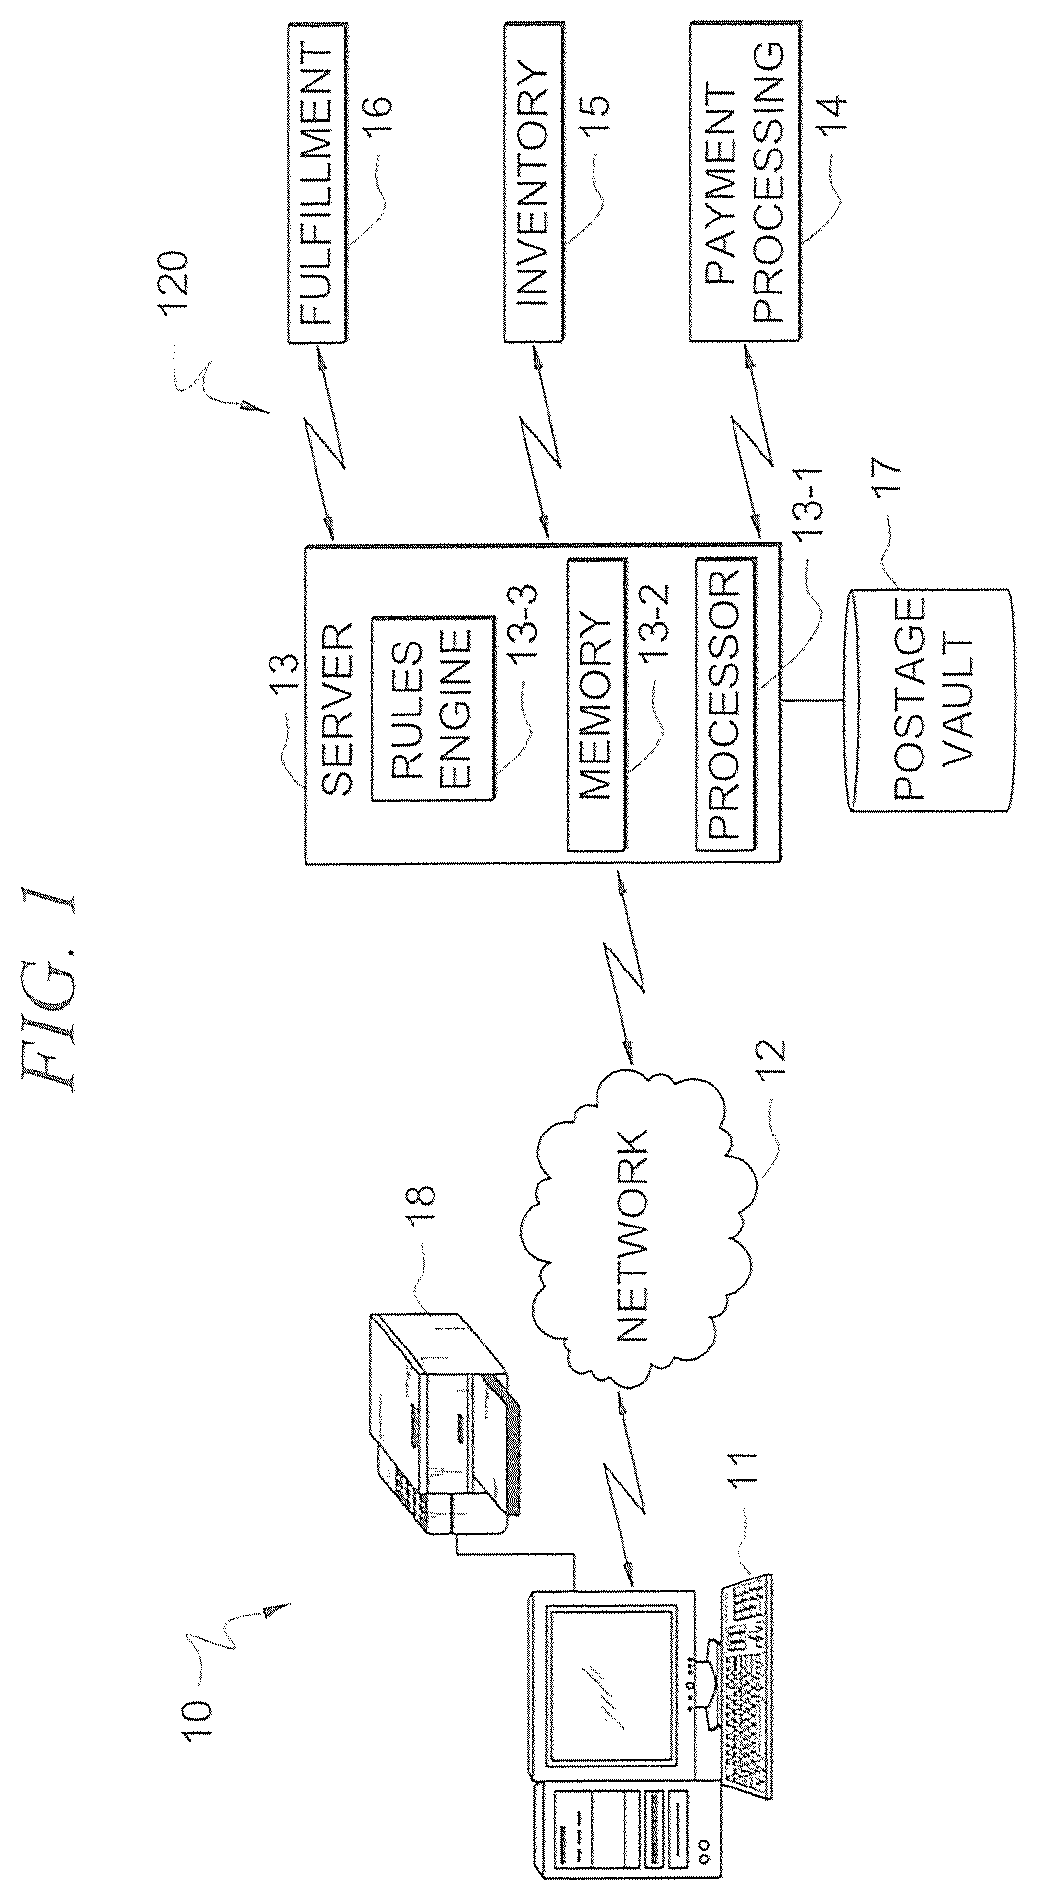 System and method for identifying and preventing on-line fraud